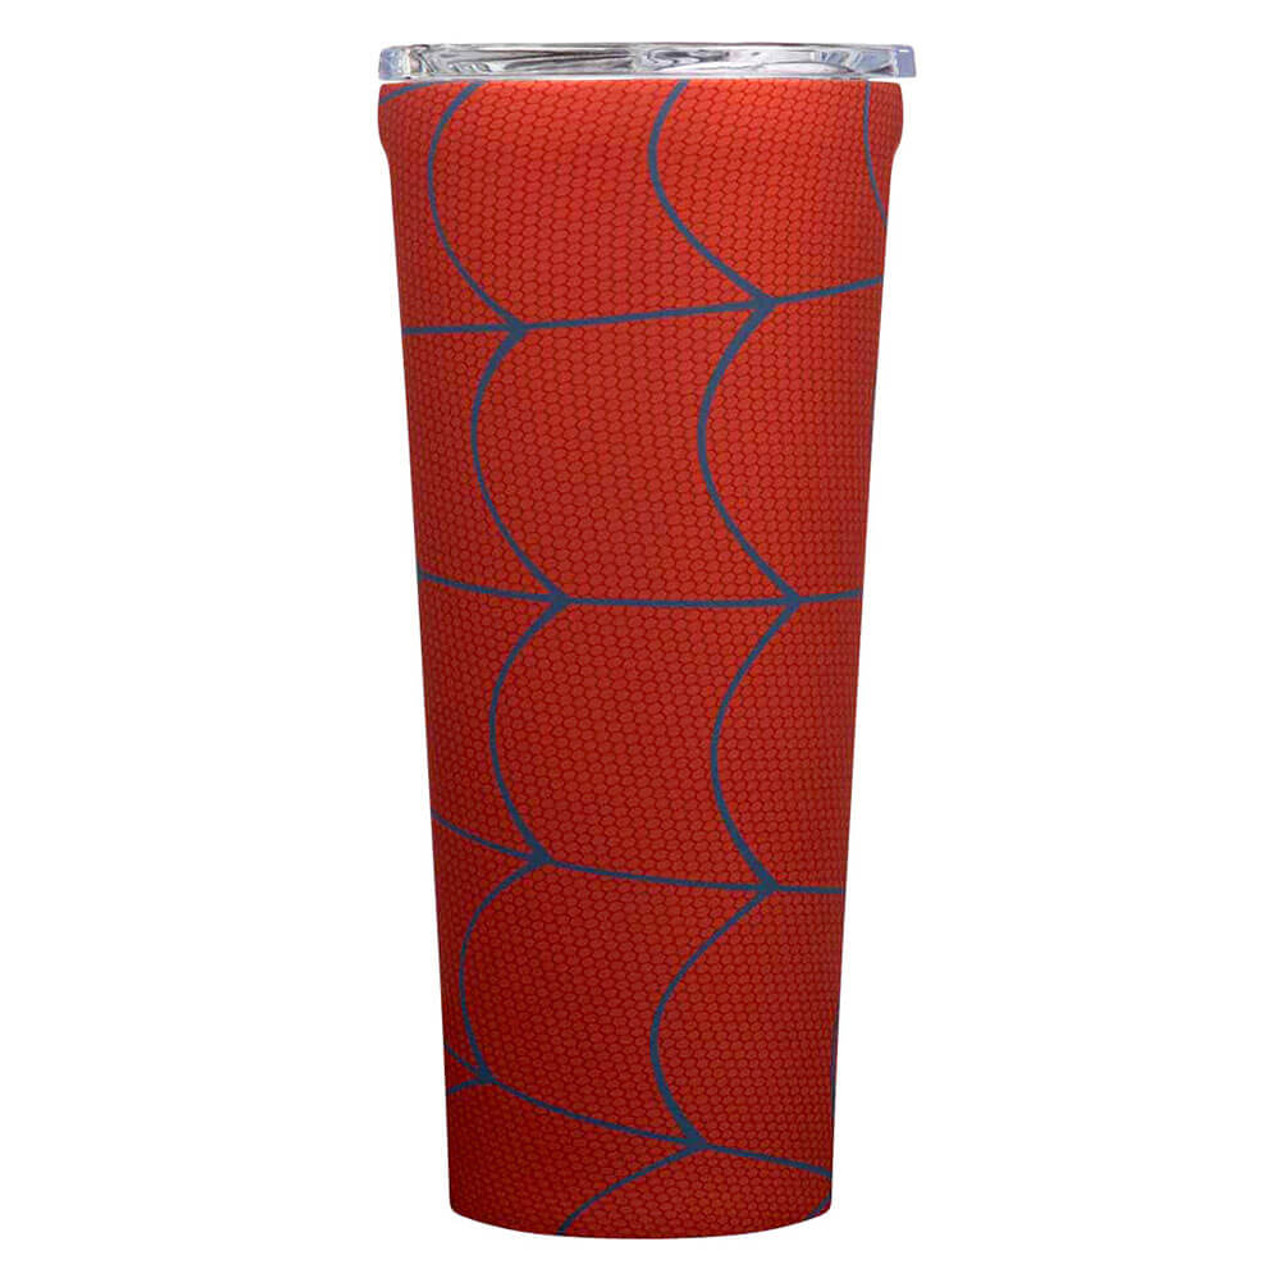 Marvel Stainless Steel Mug by Corkcicle